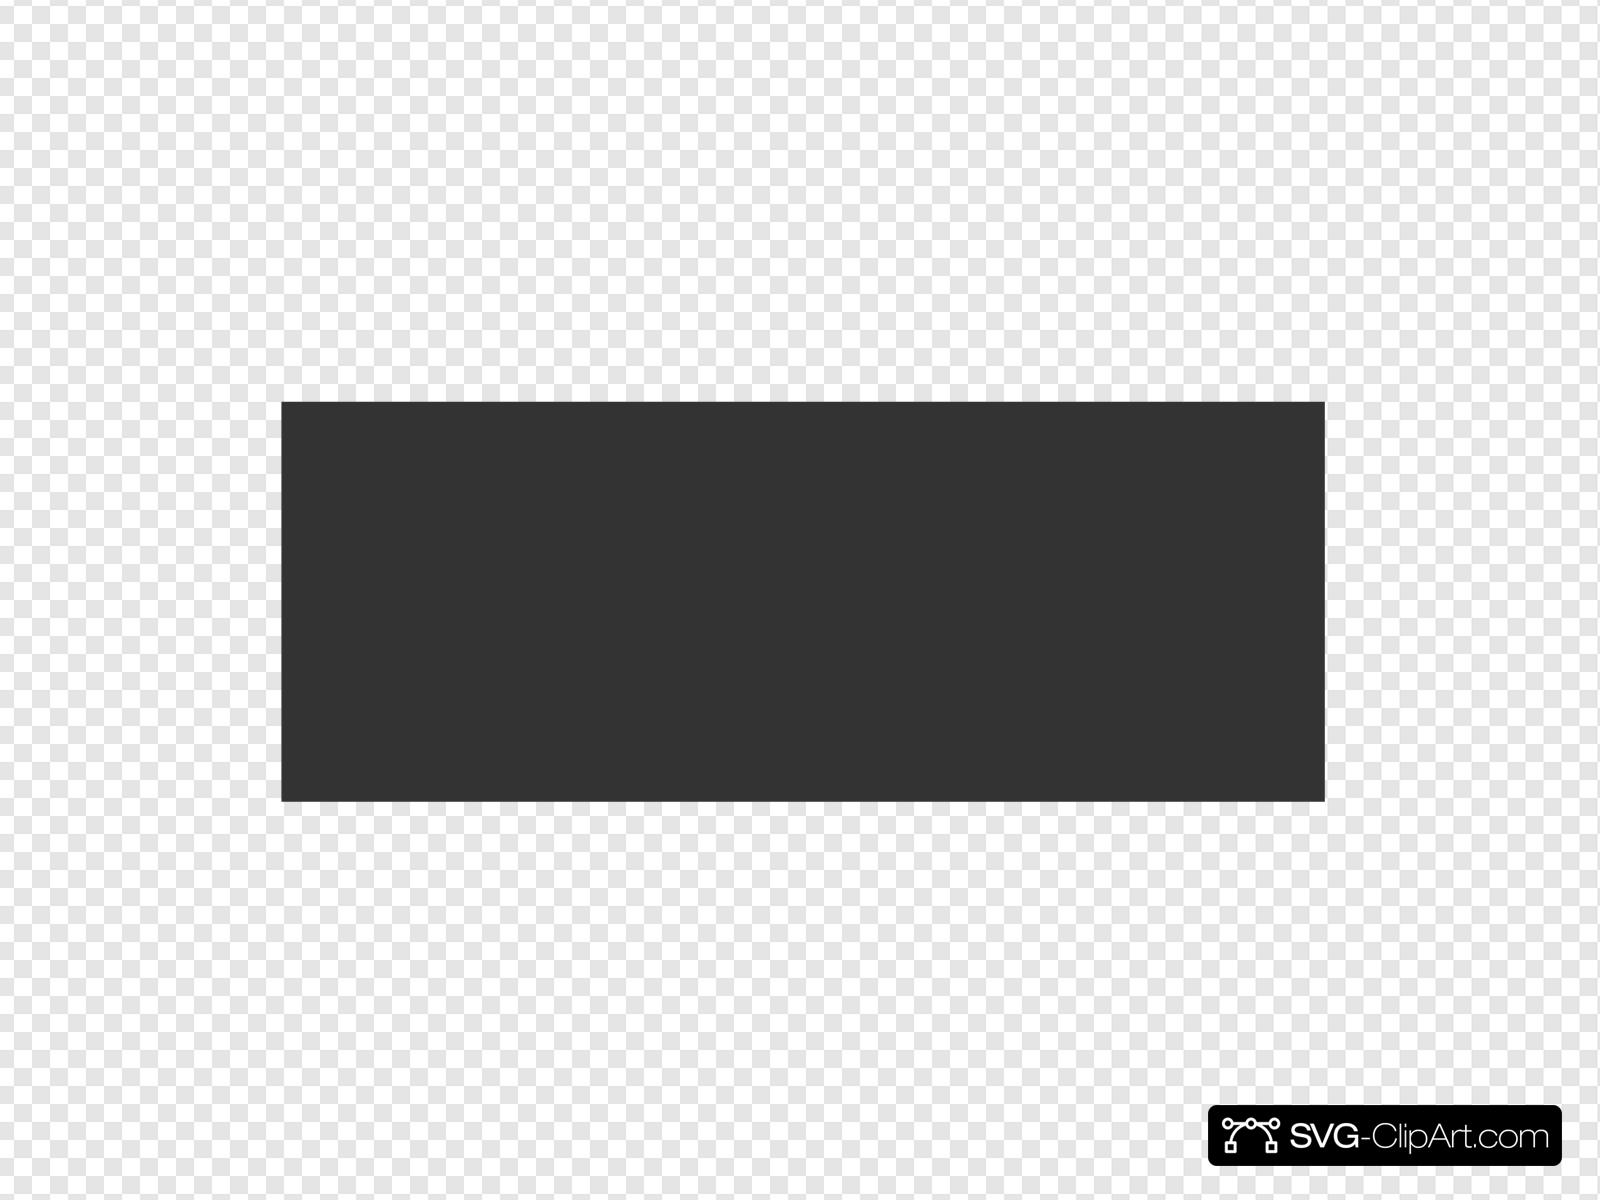 Black Rectangle Clip art, Icon and SVG.